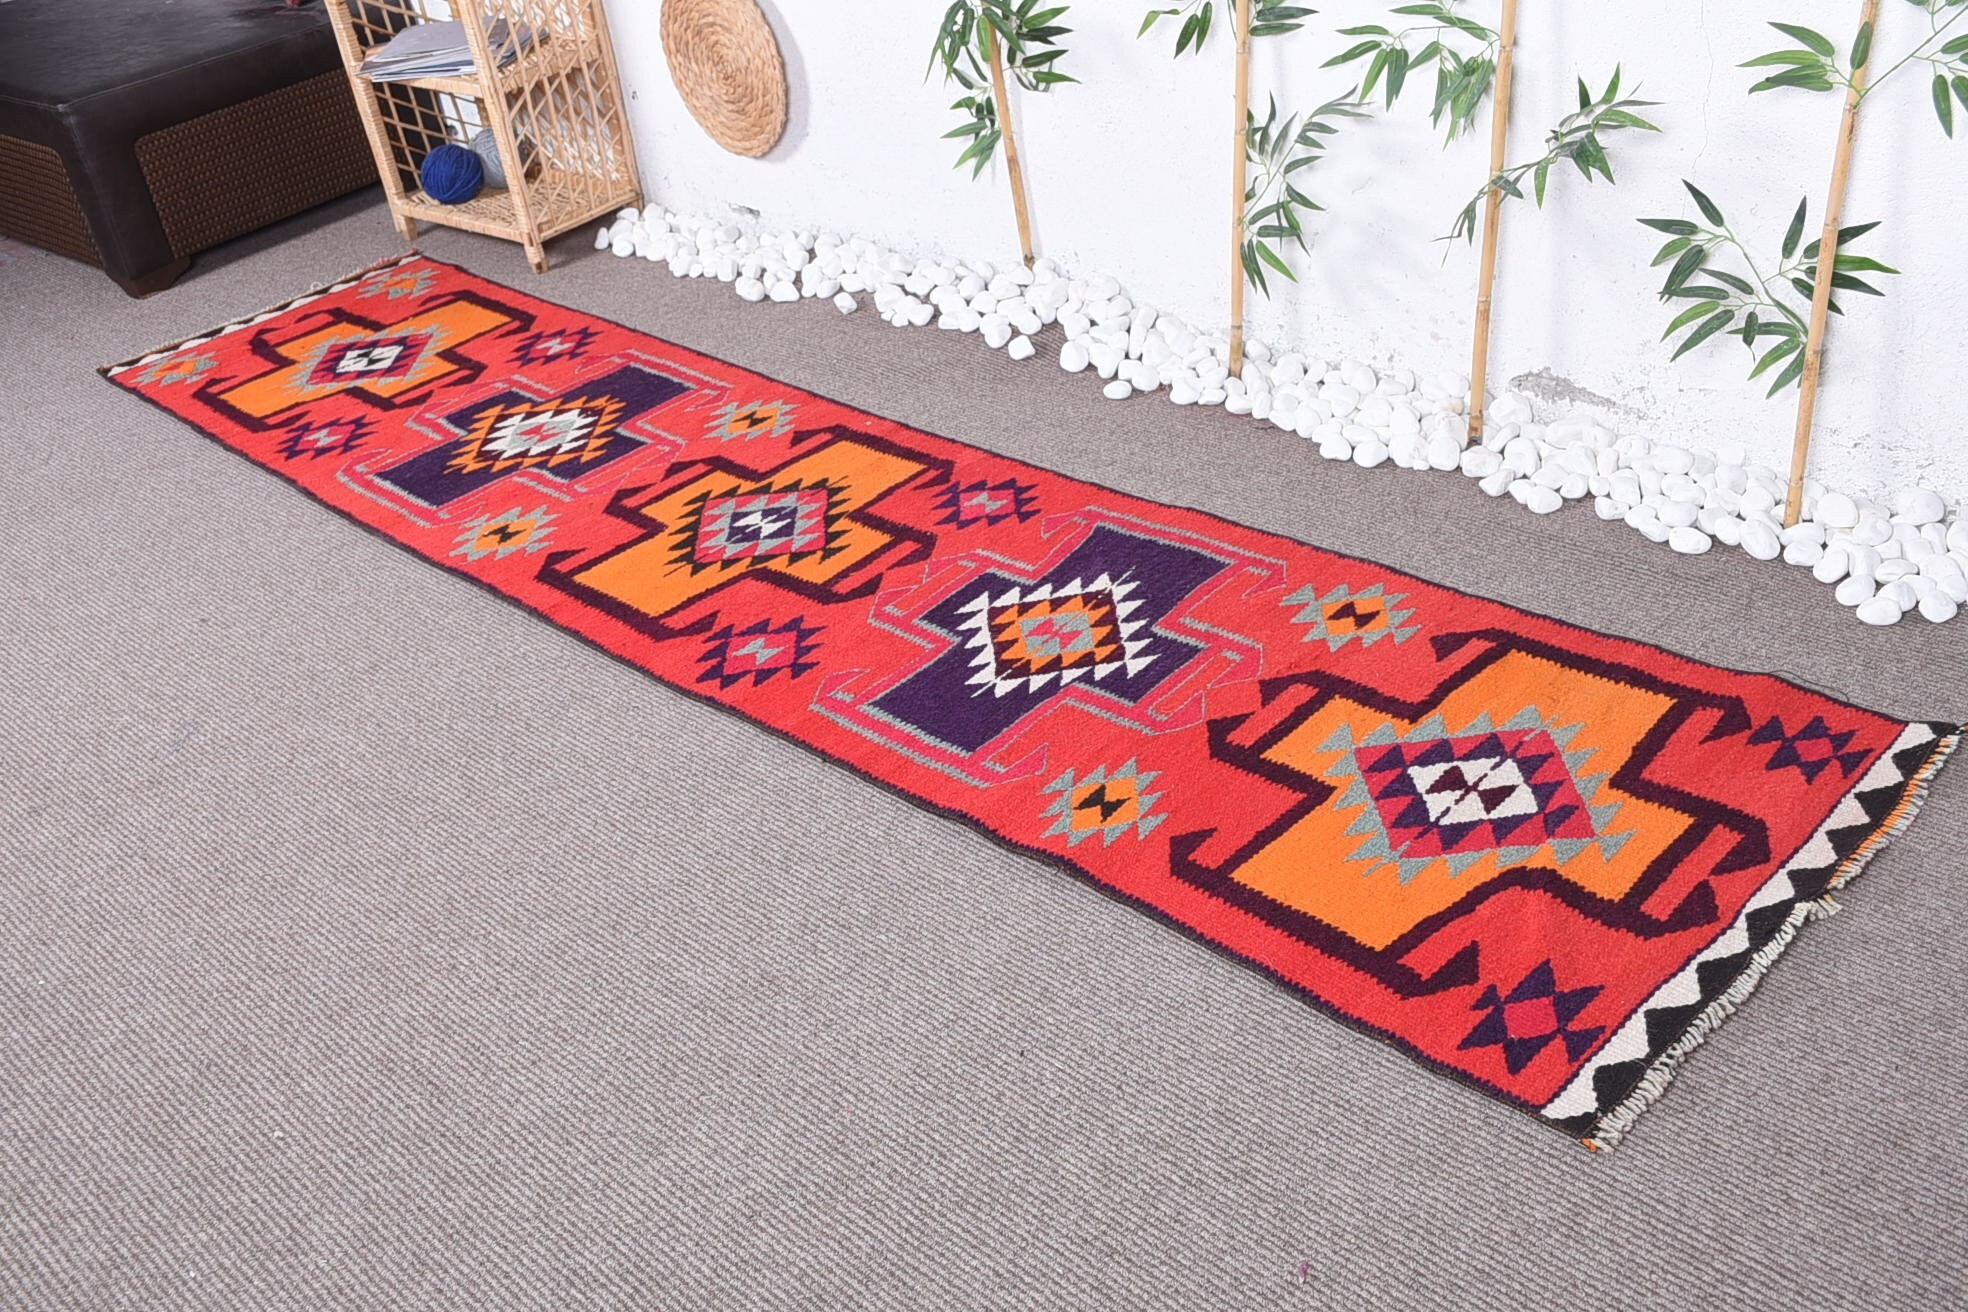 Hallway Rugs, Cool Rug, Turkish Rug, 2.3x10.4 ft Runner Rug, Red Kitchen Rugs, Anatolian Rugs, Stair Rugs, Vintage Rug, Rugs for Kitchen